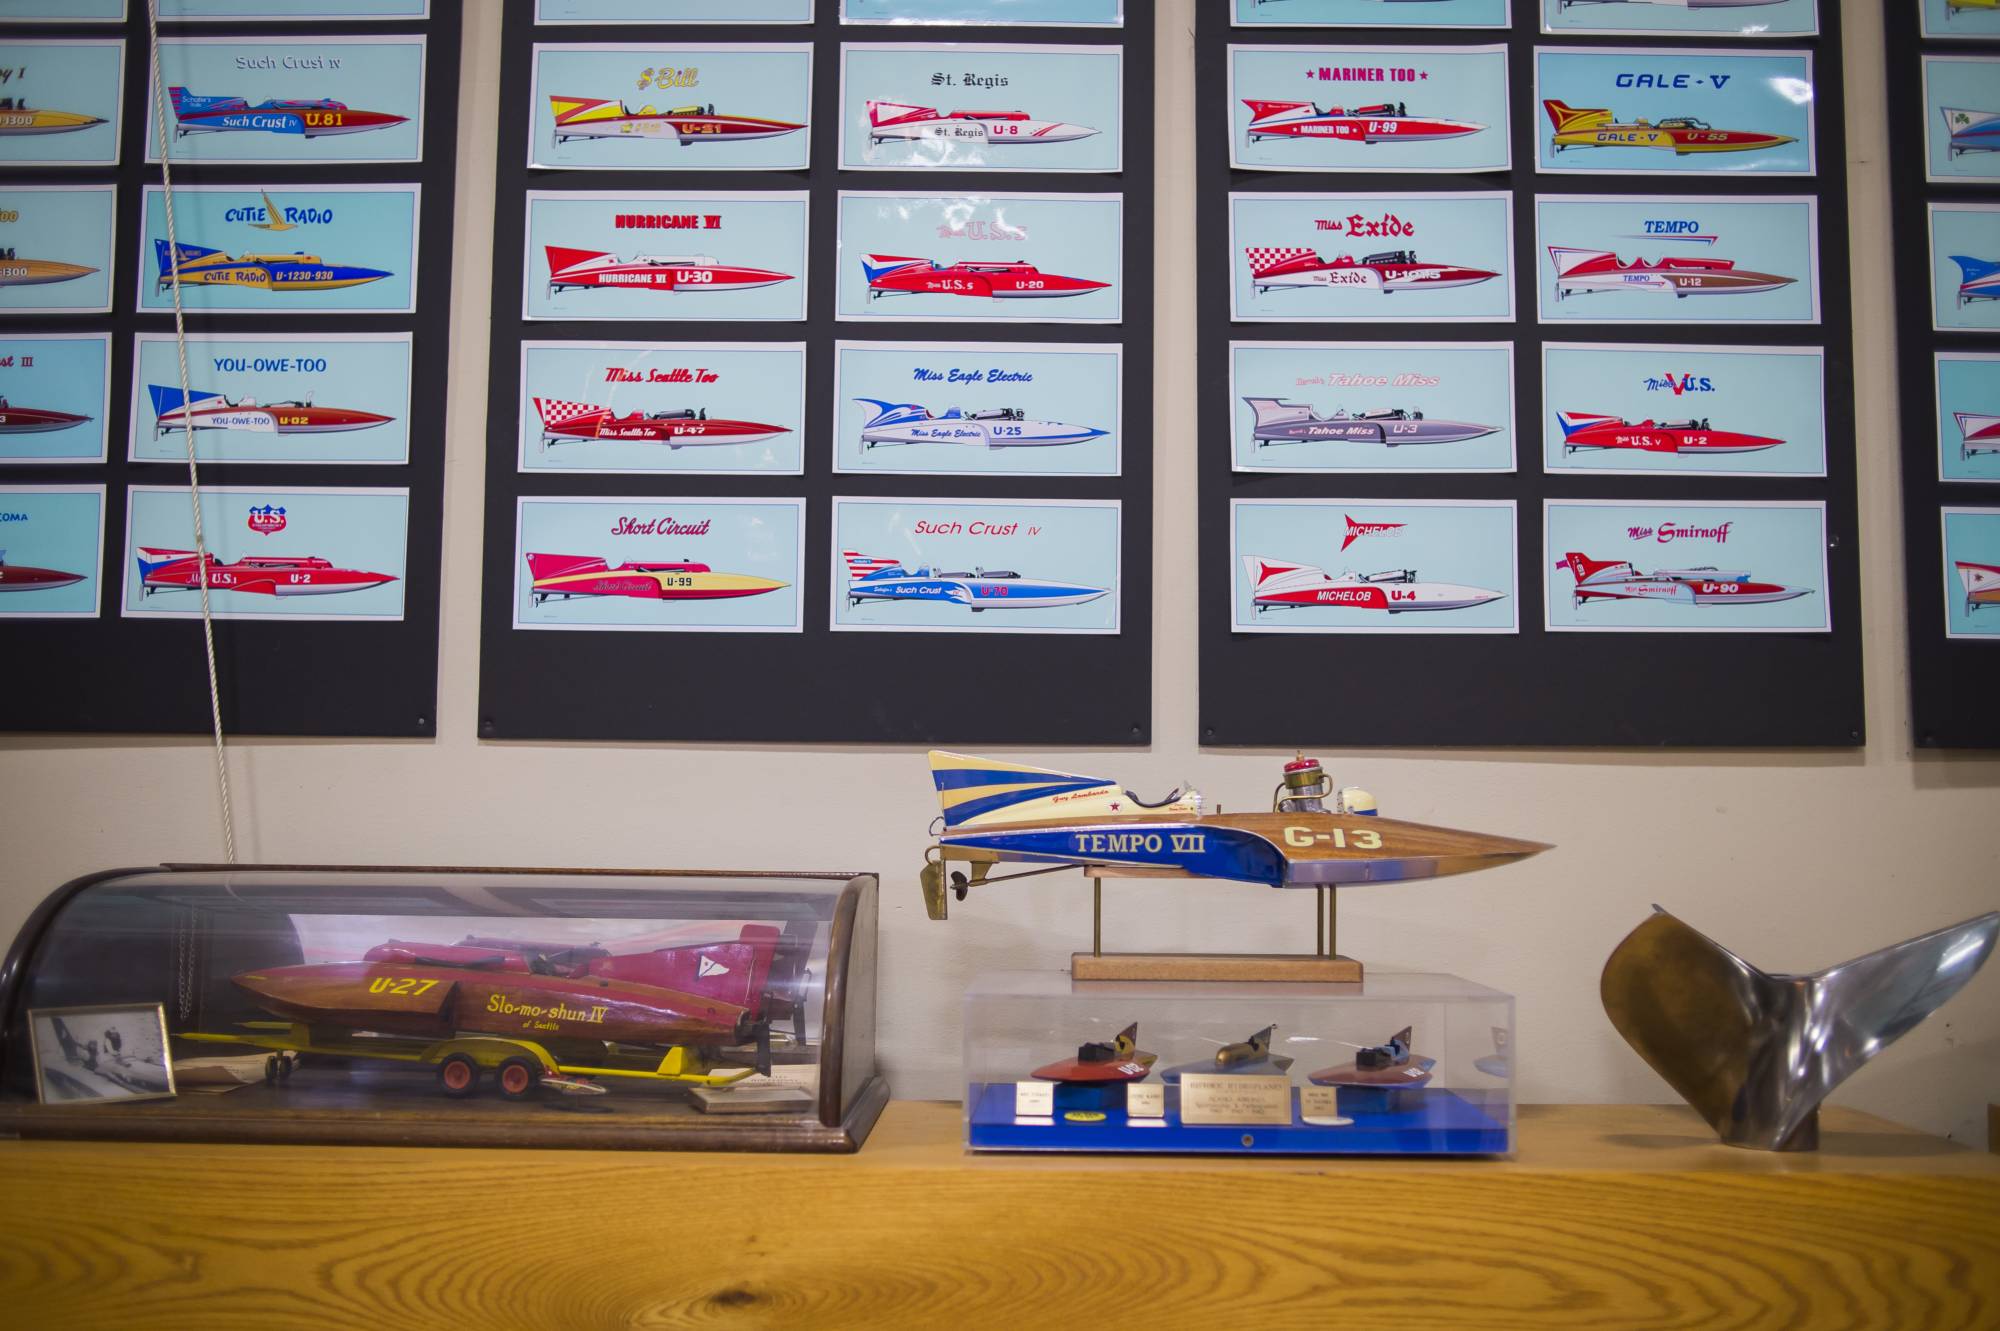 Photo of models and pictures on display at Hydroplane and Raceboat Museum in Kent, Washington